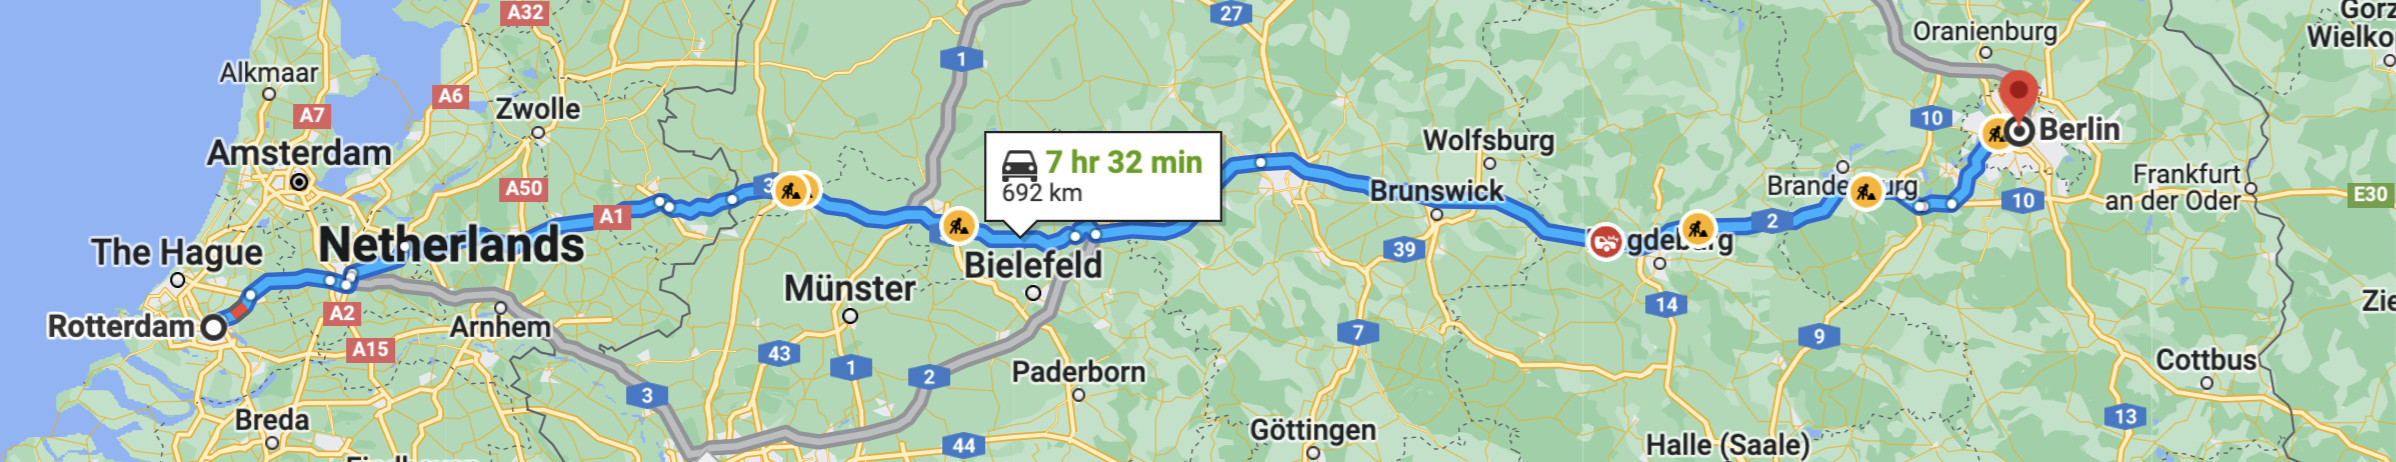 Default Google Maps driving directions from Rotterdam, Netherlands to Berlin, Germany